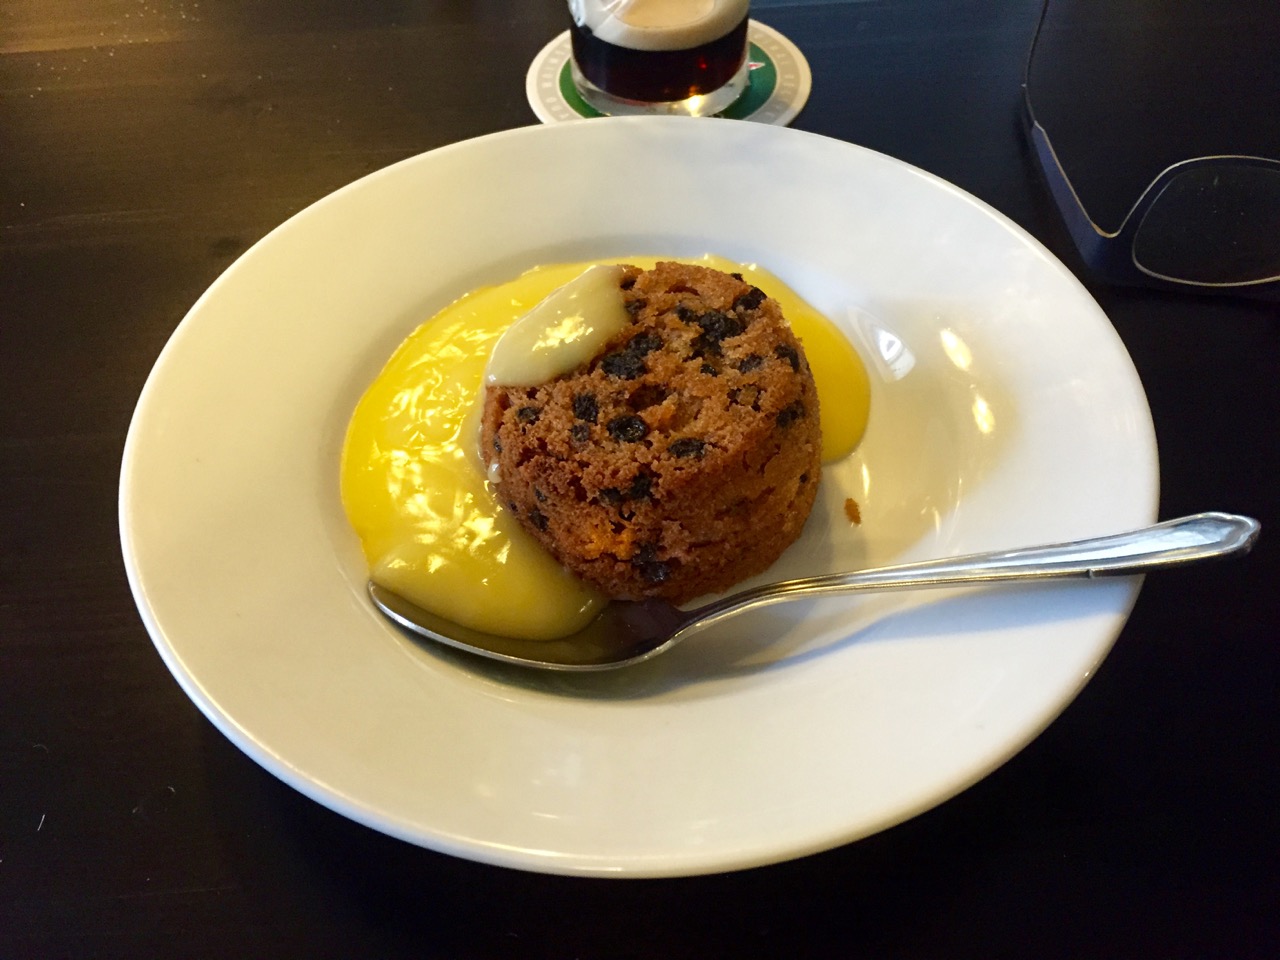 Look, it's my Spotted Dick! - Kijk, dit is mijn Spotted Dick!